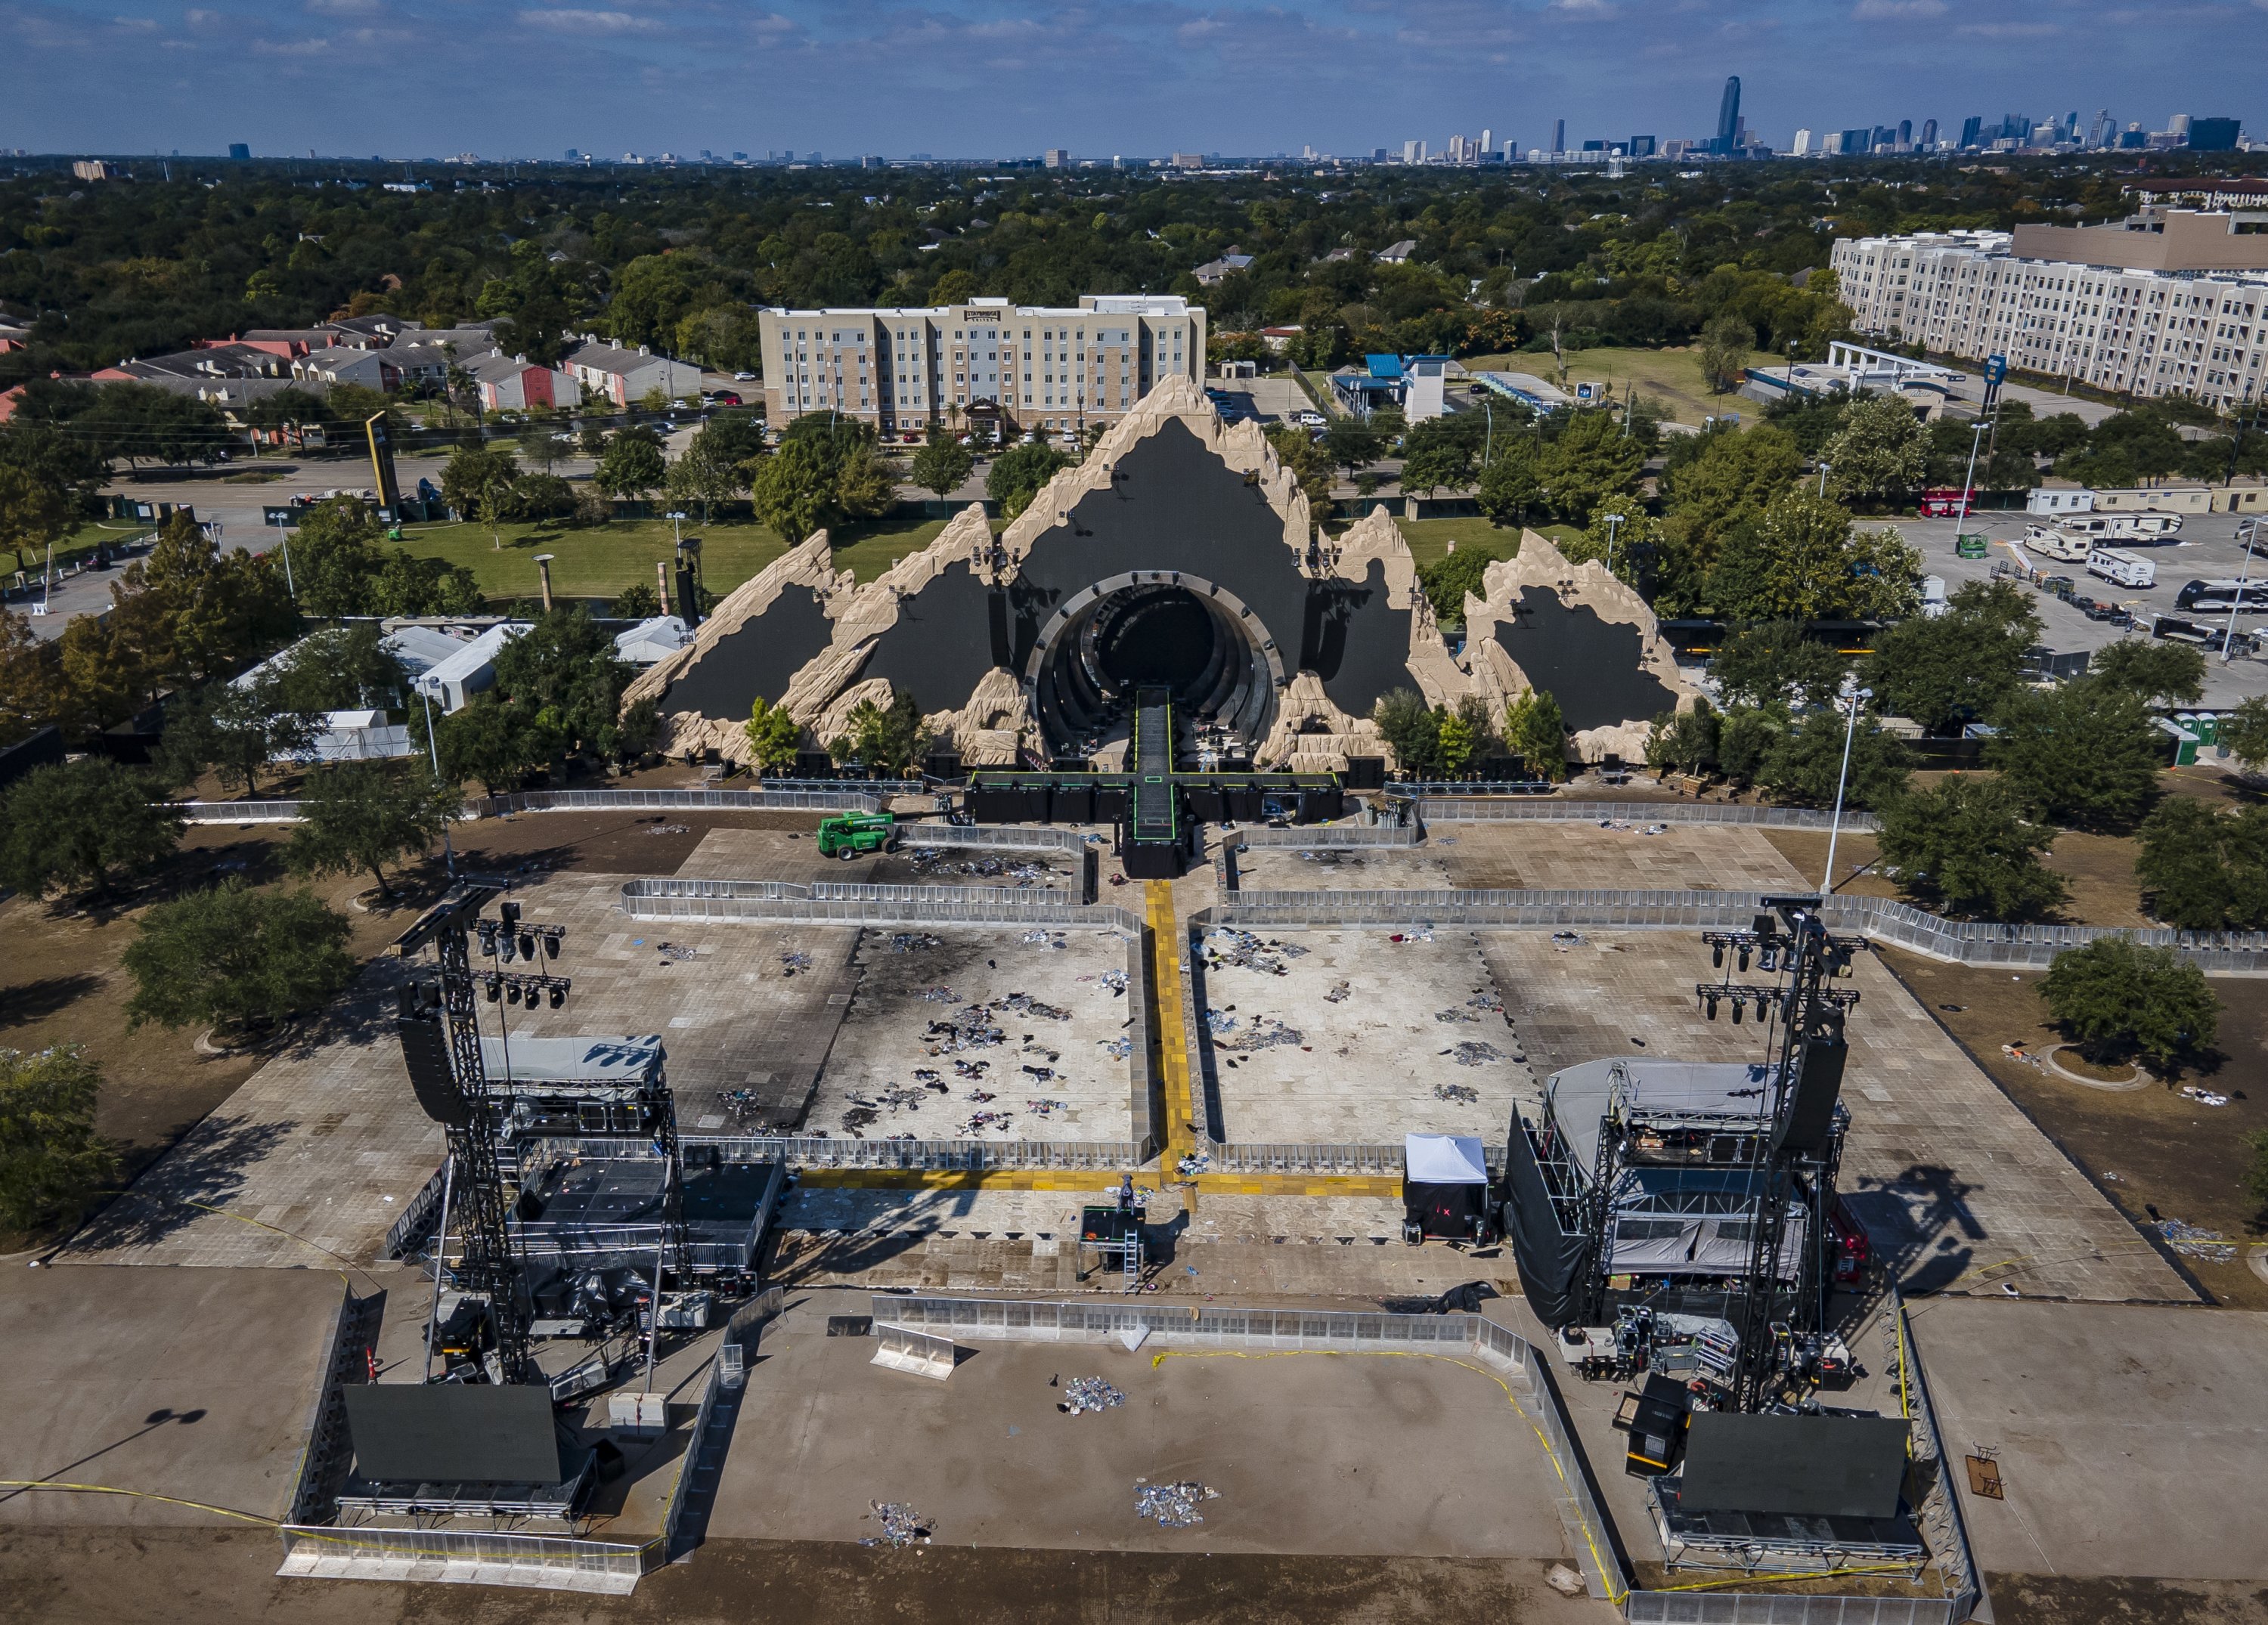 The Astroworld main stage where Travis Scott was performing Friday evening where a surging crowd killed eight people, sits full of debris from the concert, in a parking lot at NRG Center, in Houston, Texas, Nov. 8, 2021. (AP Photo)